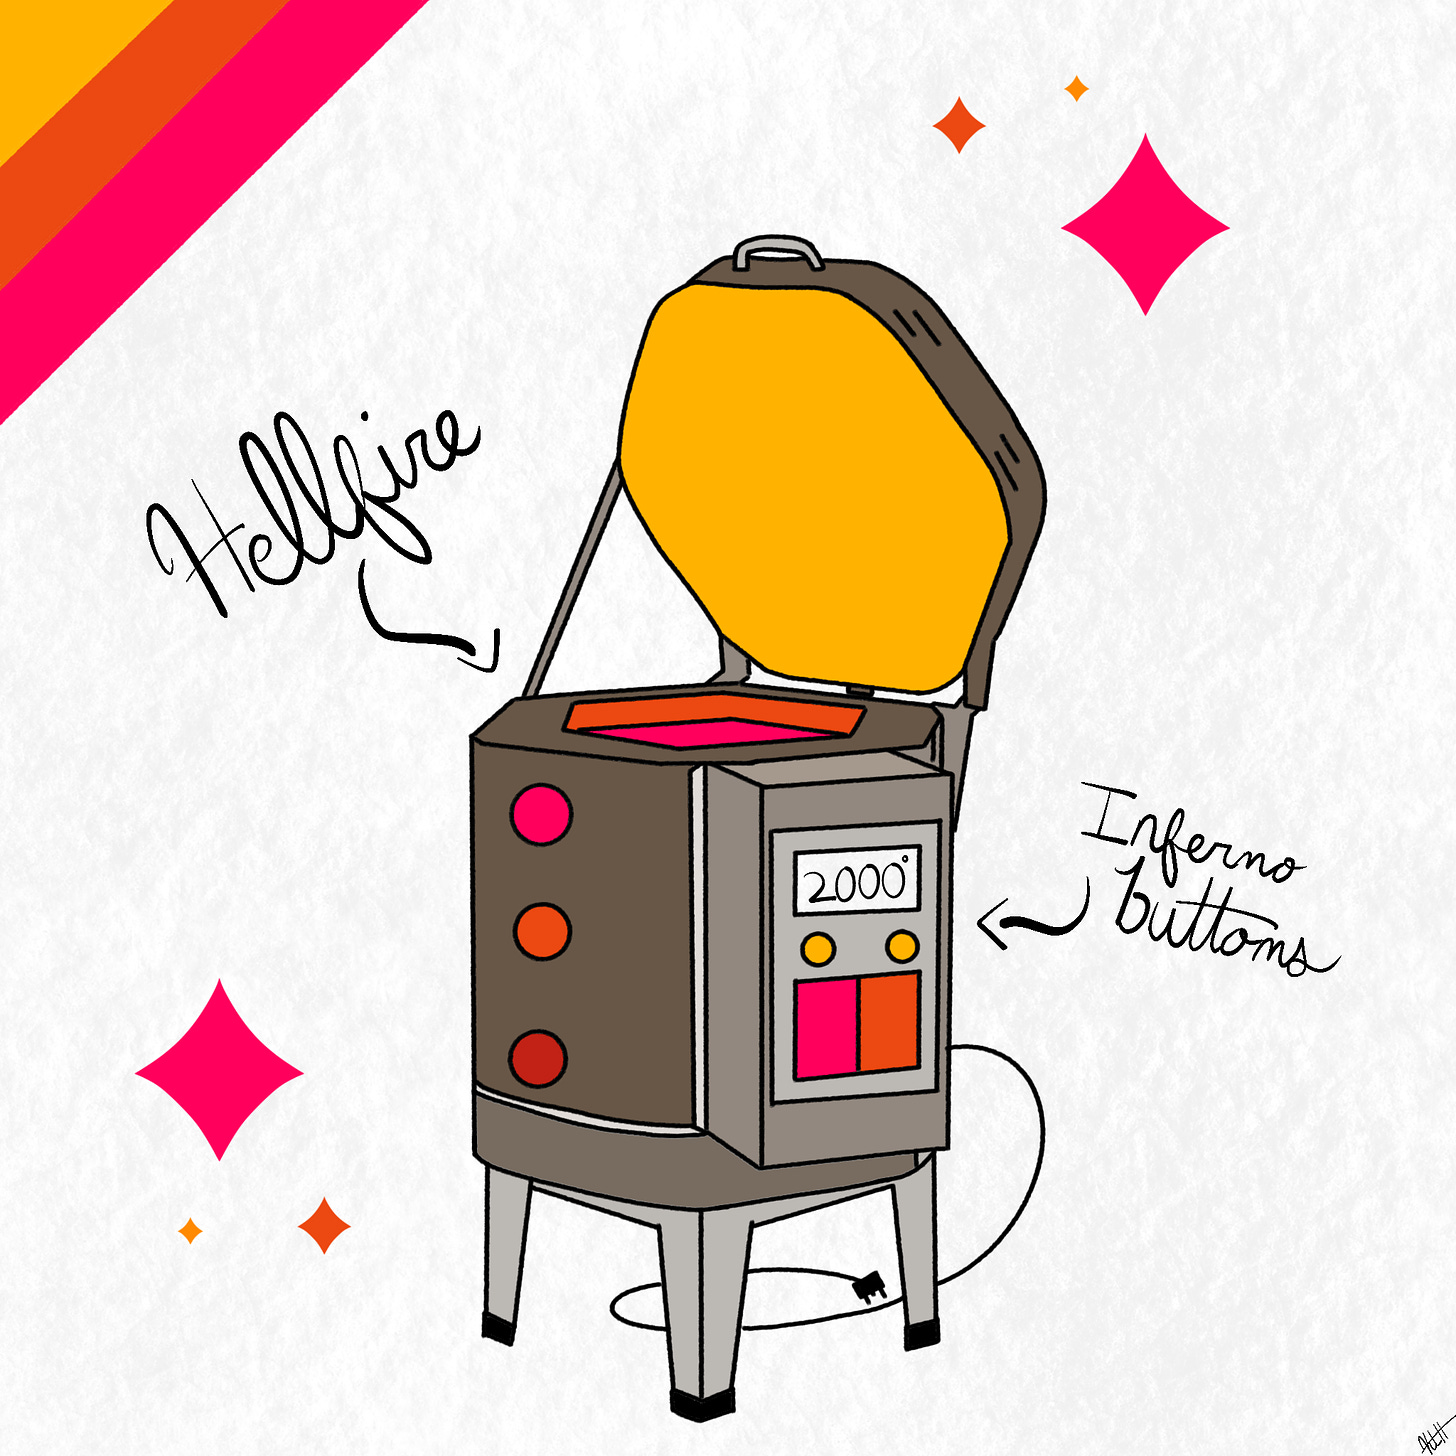 drawing of a kiln with the caption "hellfire" and "inferno buttons"